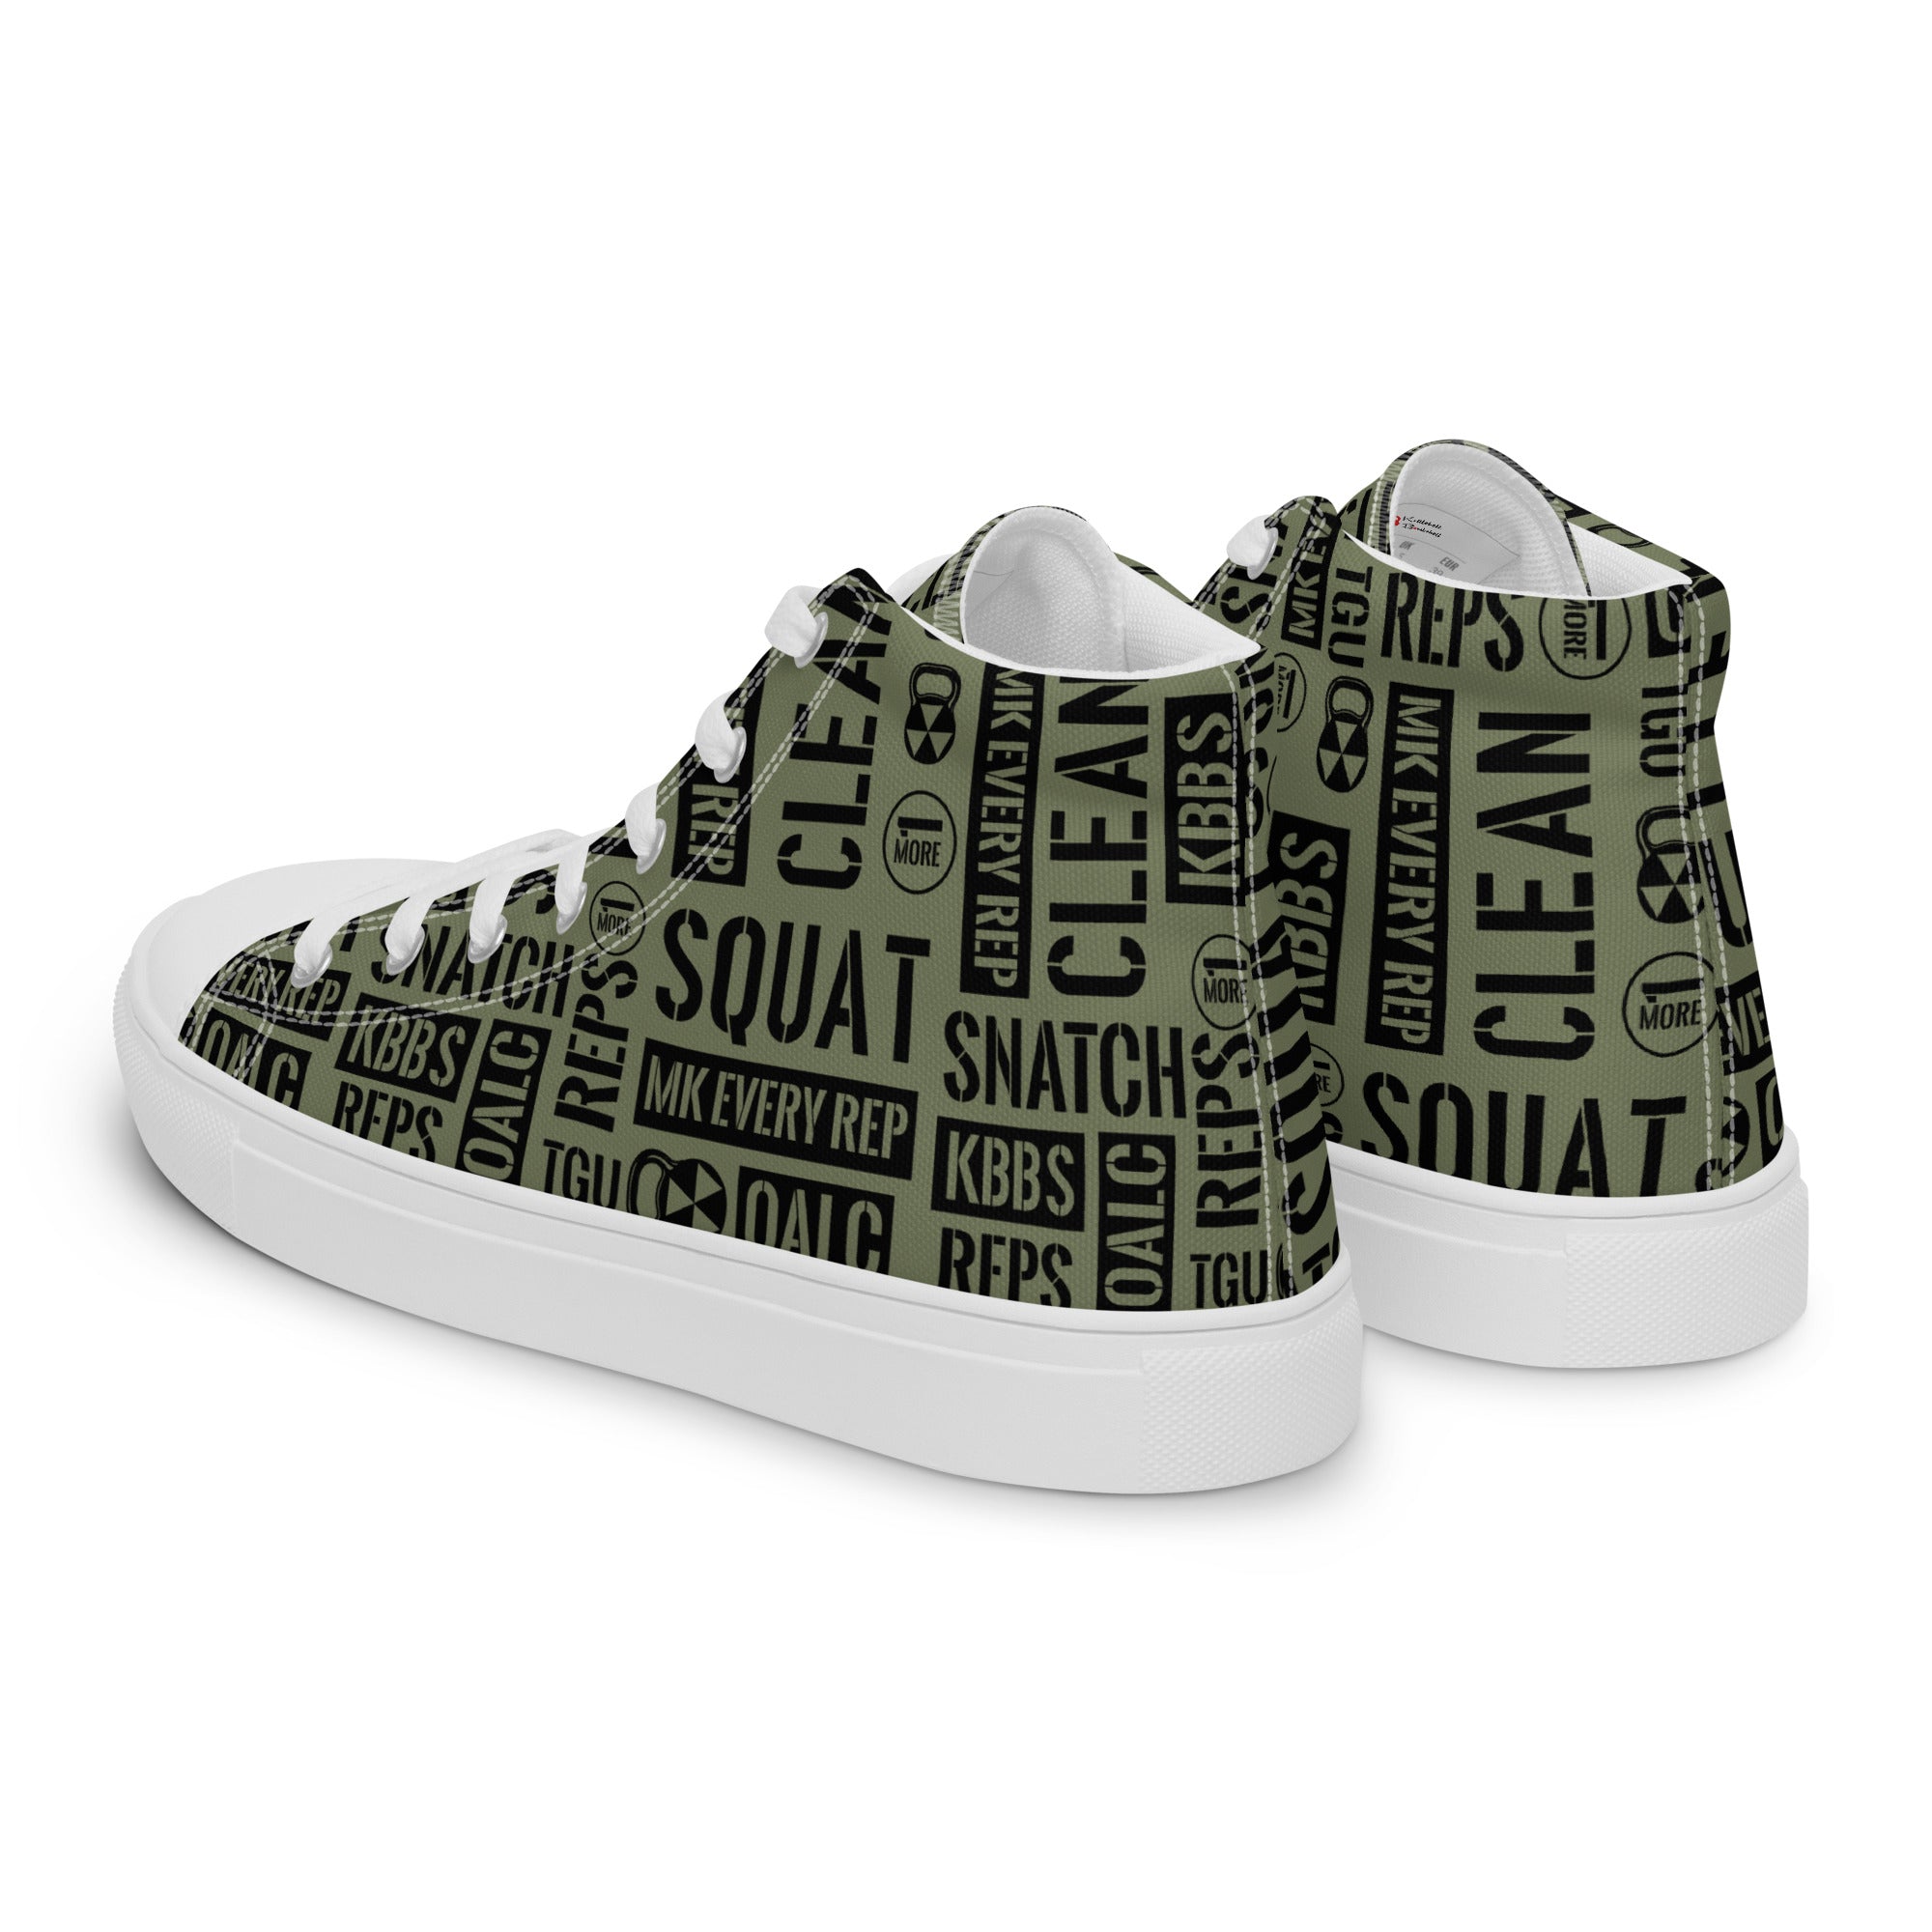 Military Green Acronyms Women’s White High Tops